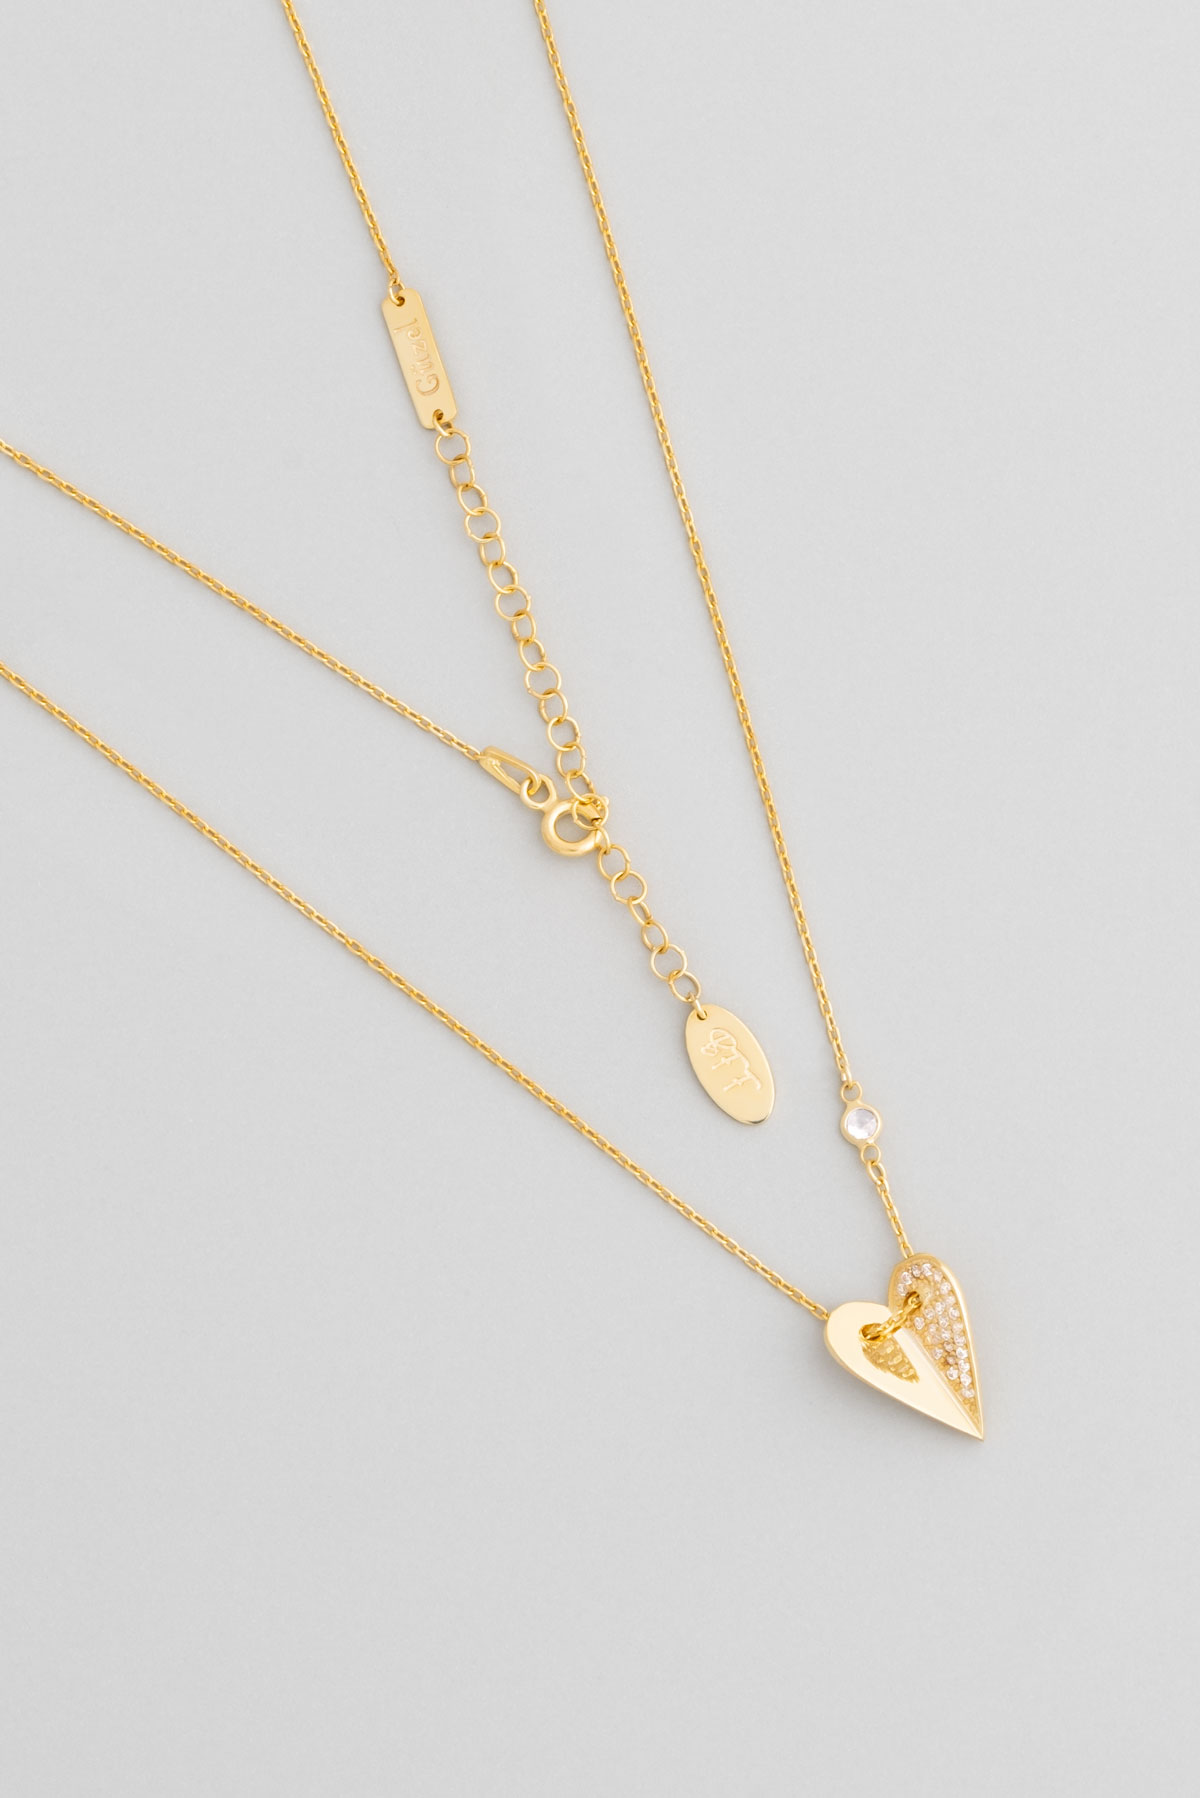  Heart 18 Karat Yellow Gold Plated Silver Friendship Necklace